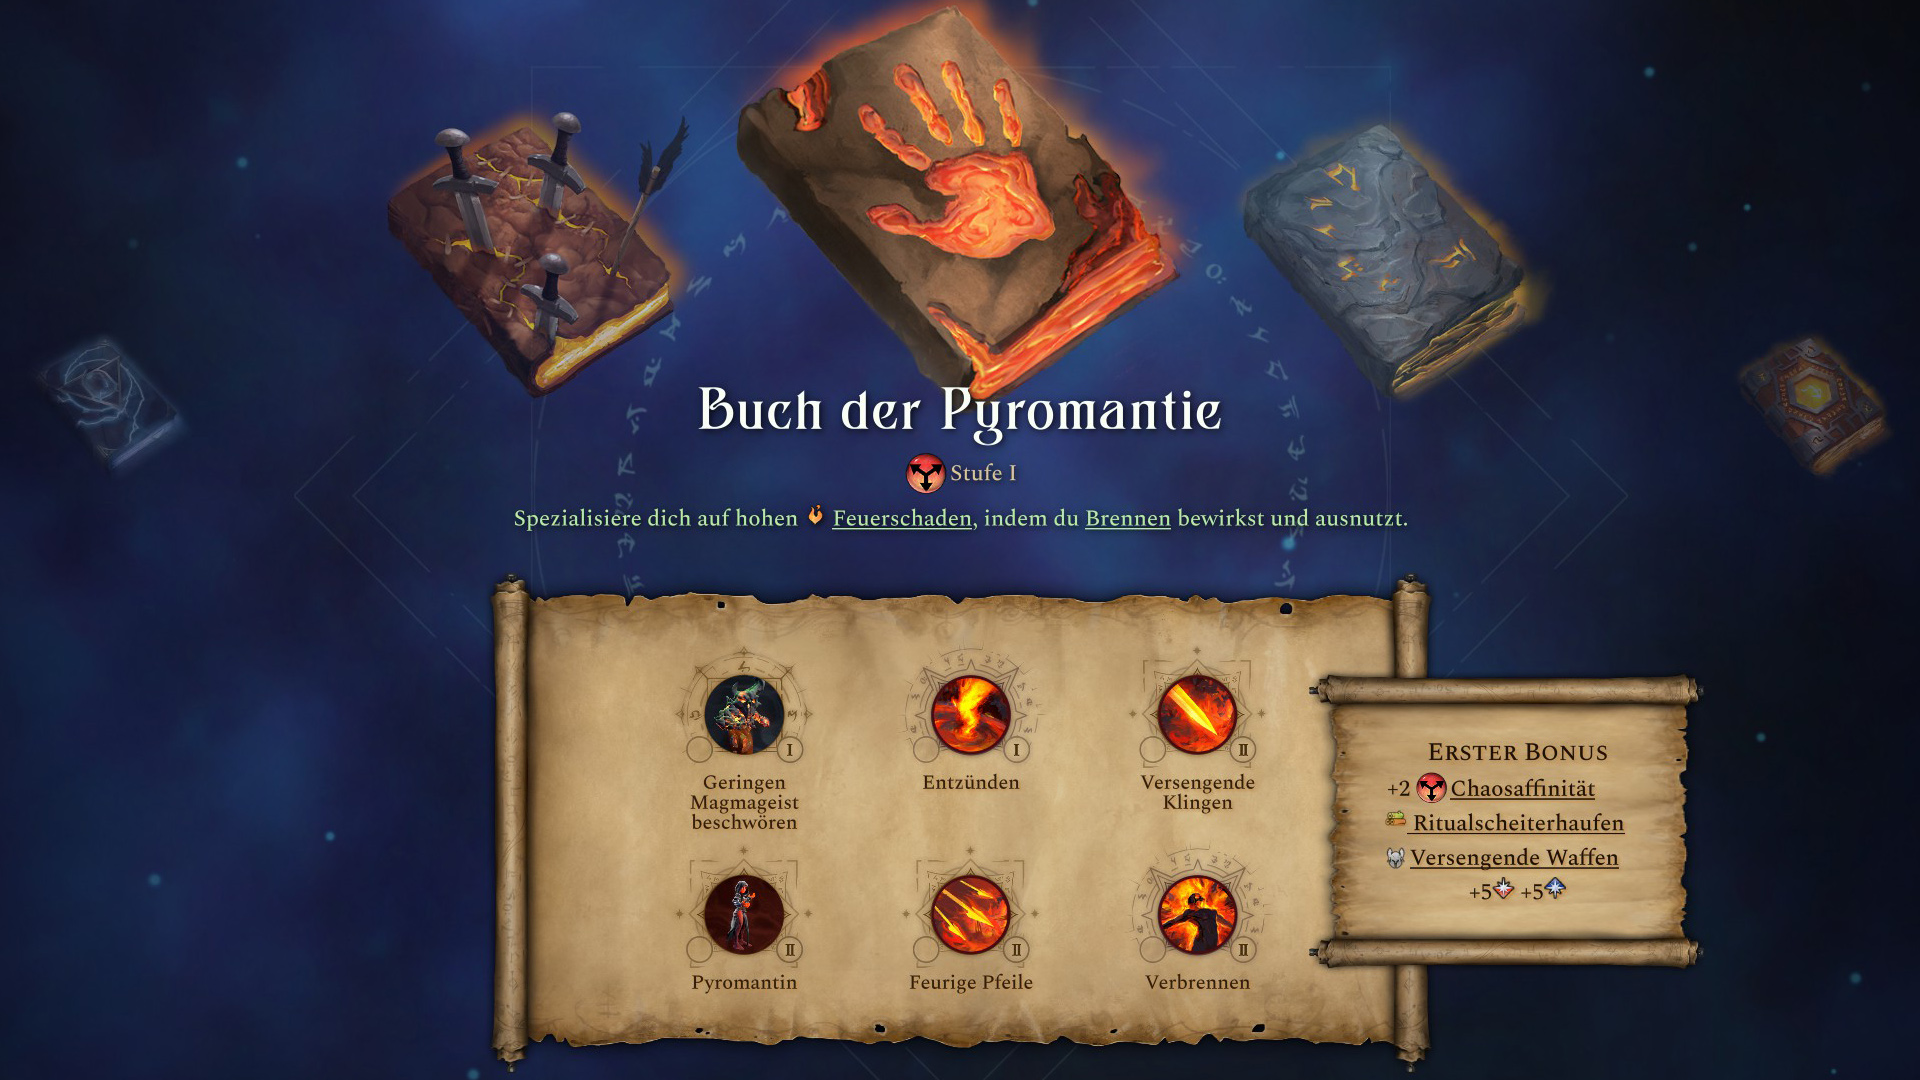 Here you can explore the magical book of pyromancy